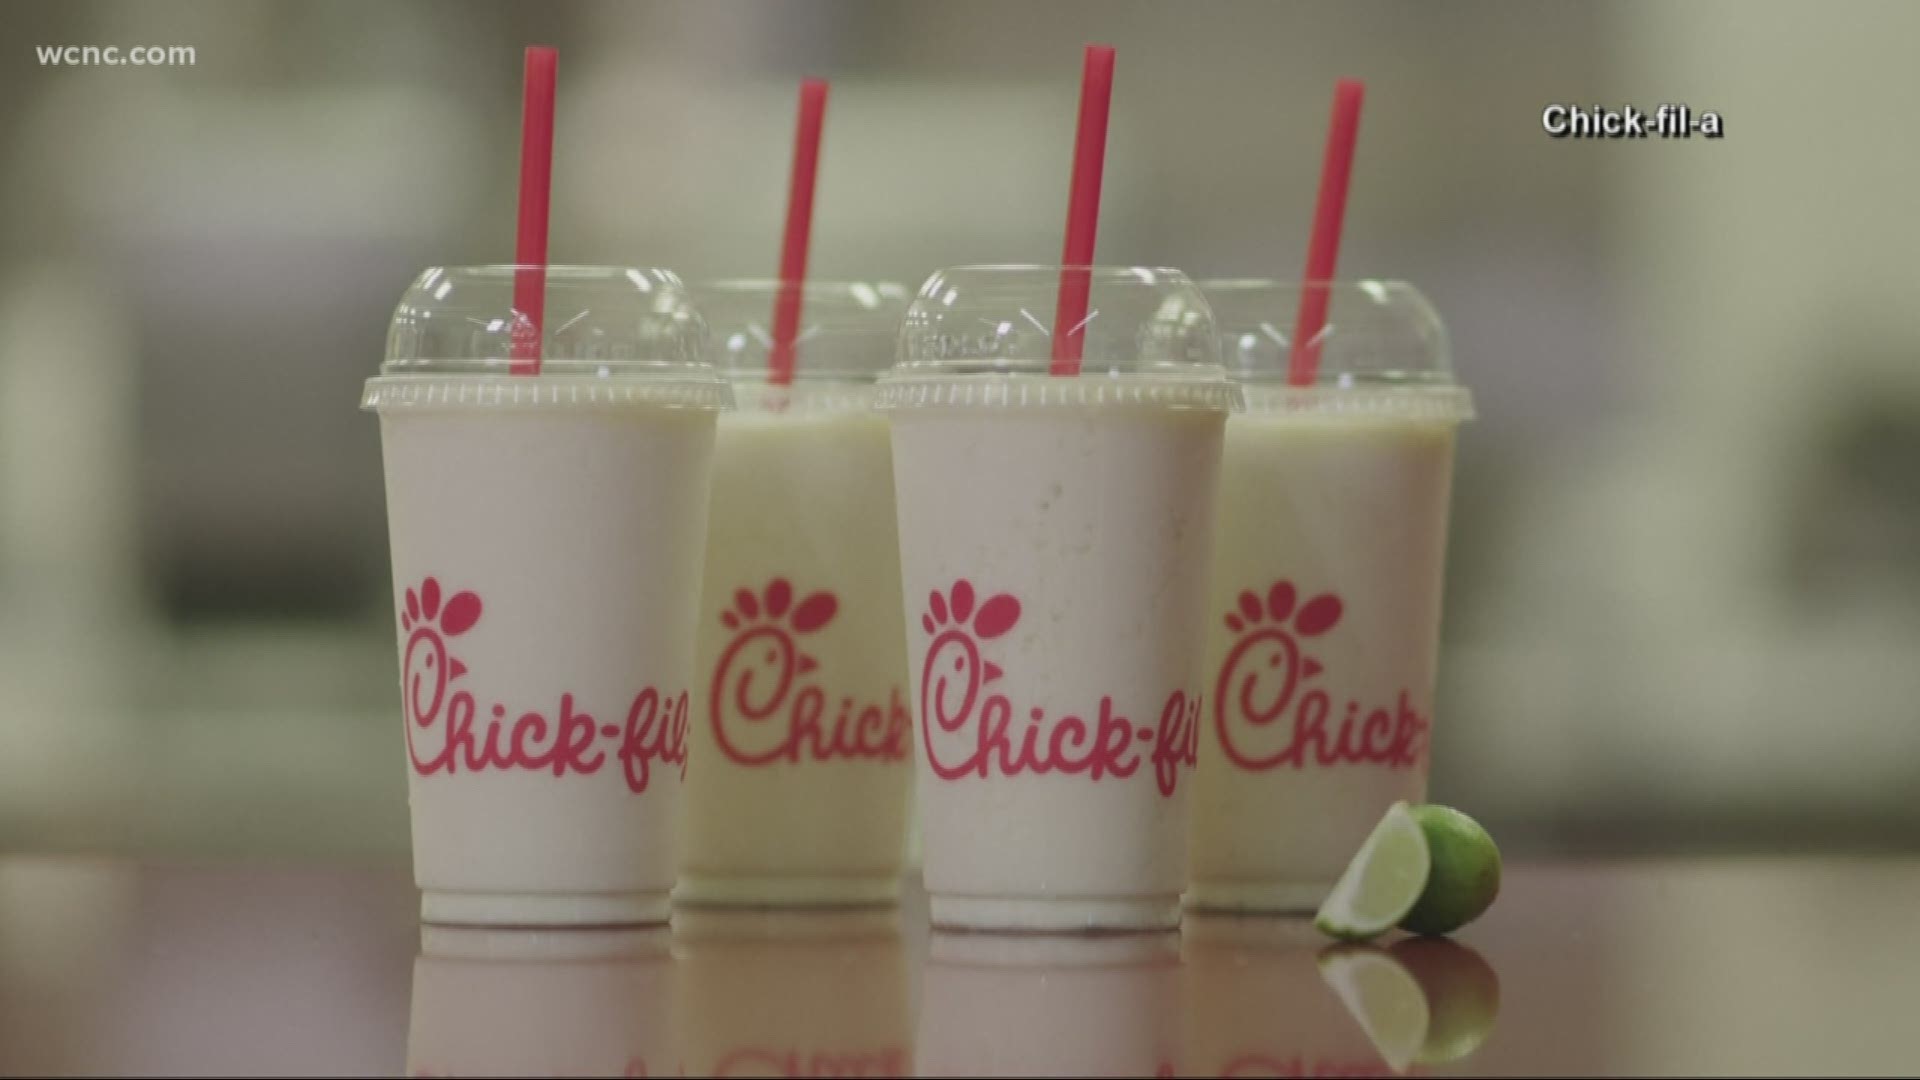 After a successful test run in Texas, Chick-fil-A is bringing its new springtime Frosted Key Lime drink to restaurants nationwide.